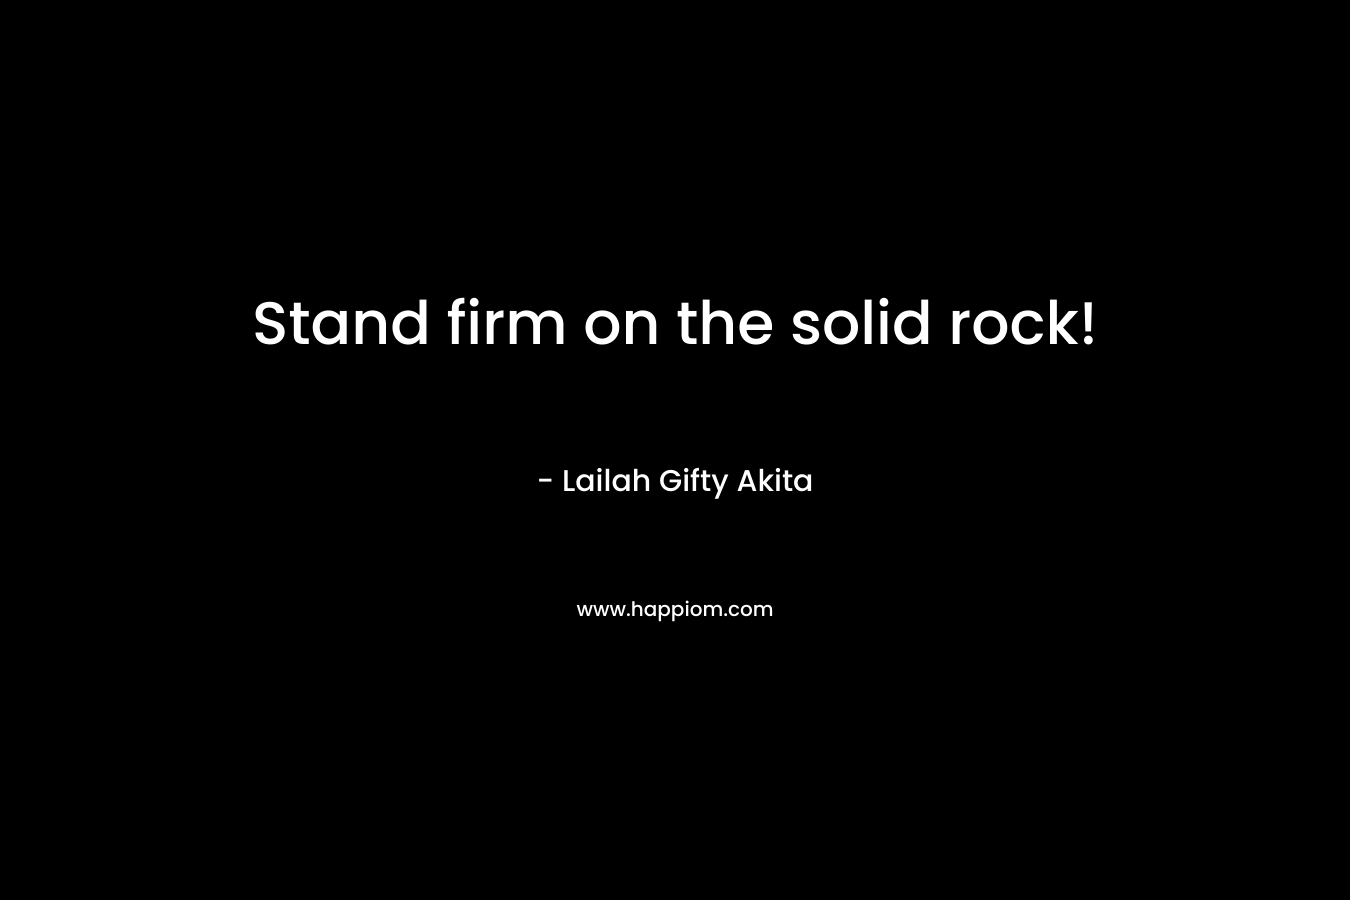 Stand firm on the solid rock!